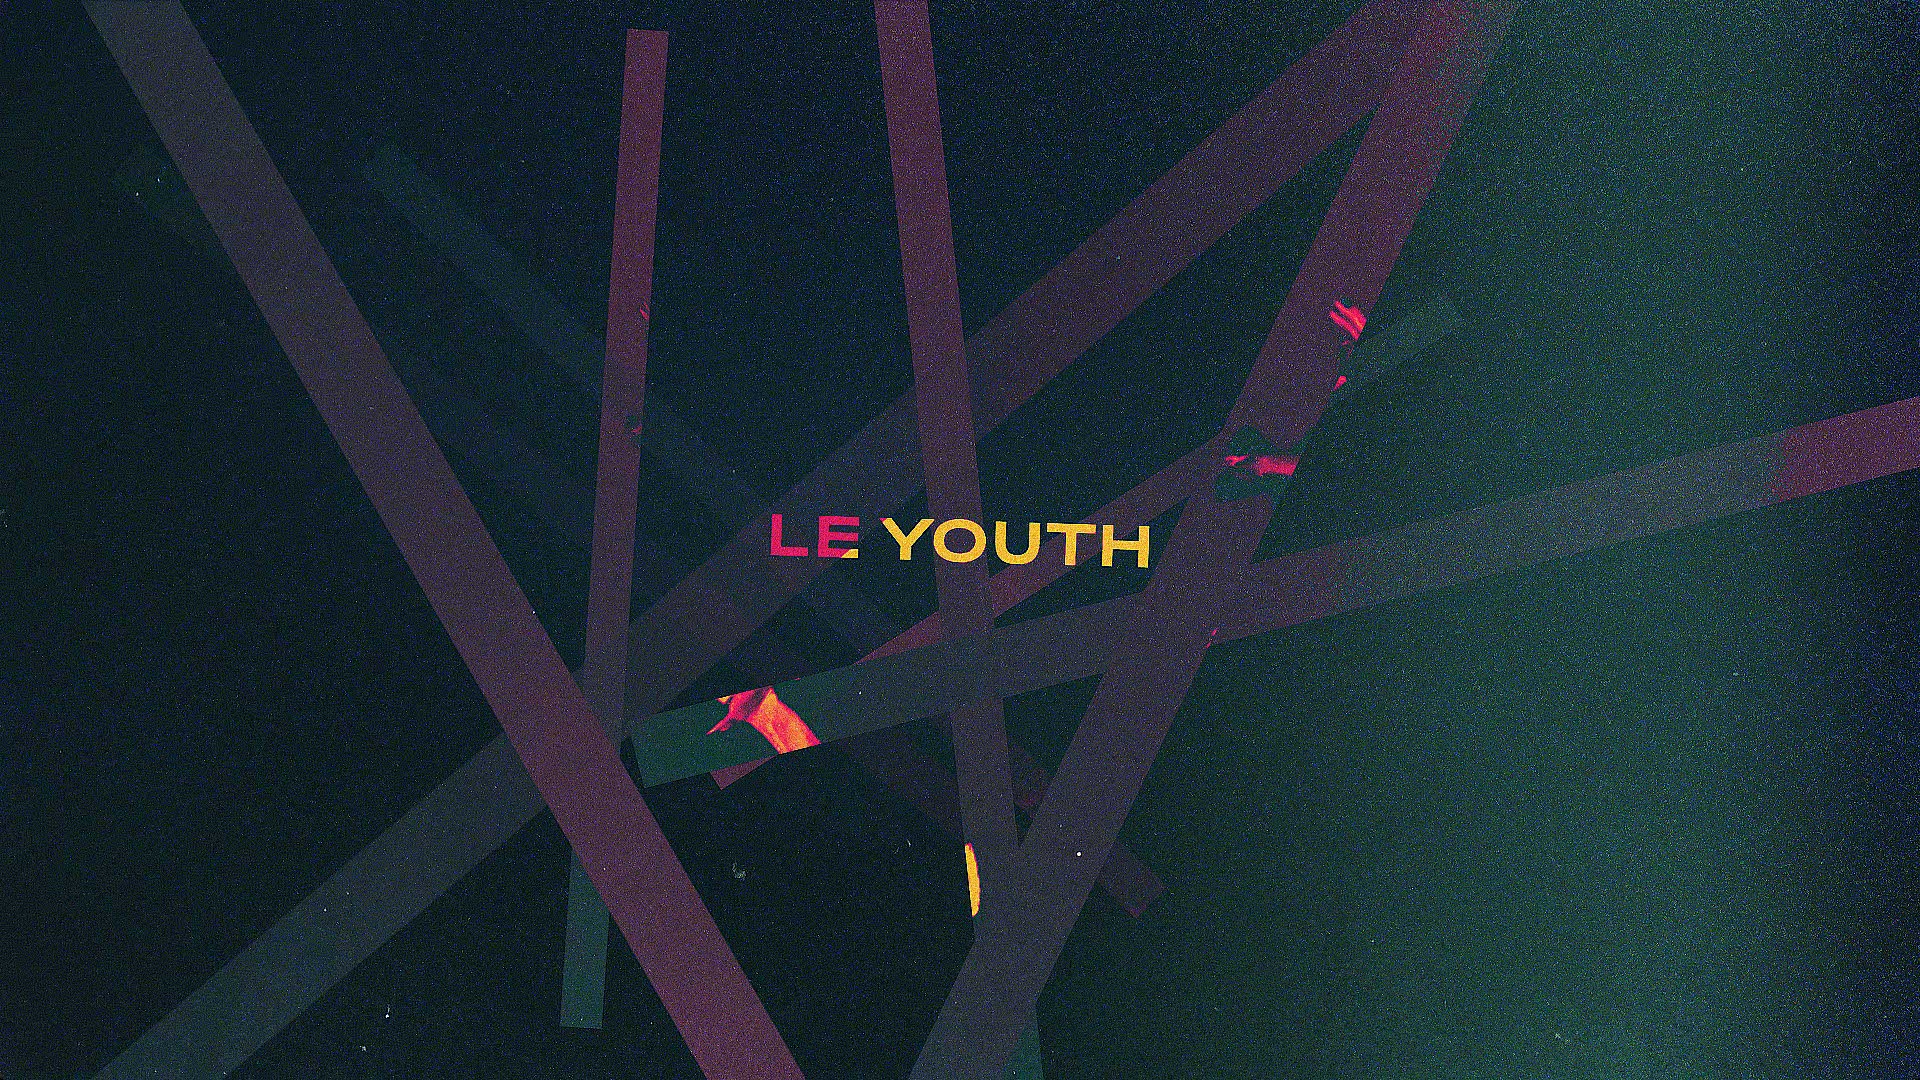 Le-youth-Tour-Visuals-Article_T1-1-Le-Youth-Tour-Visual_2023-07-03_21.15.40